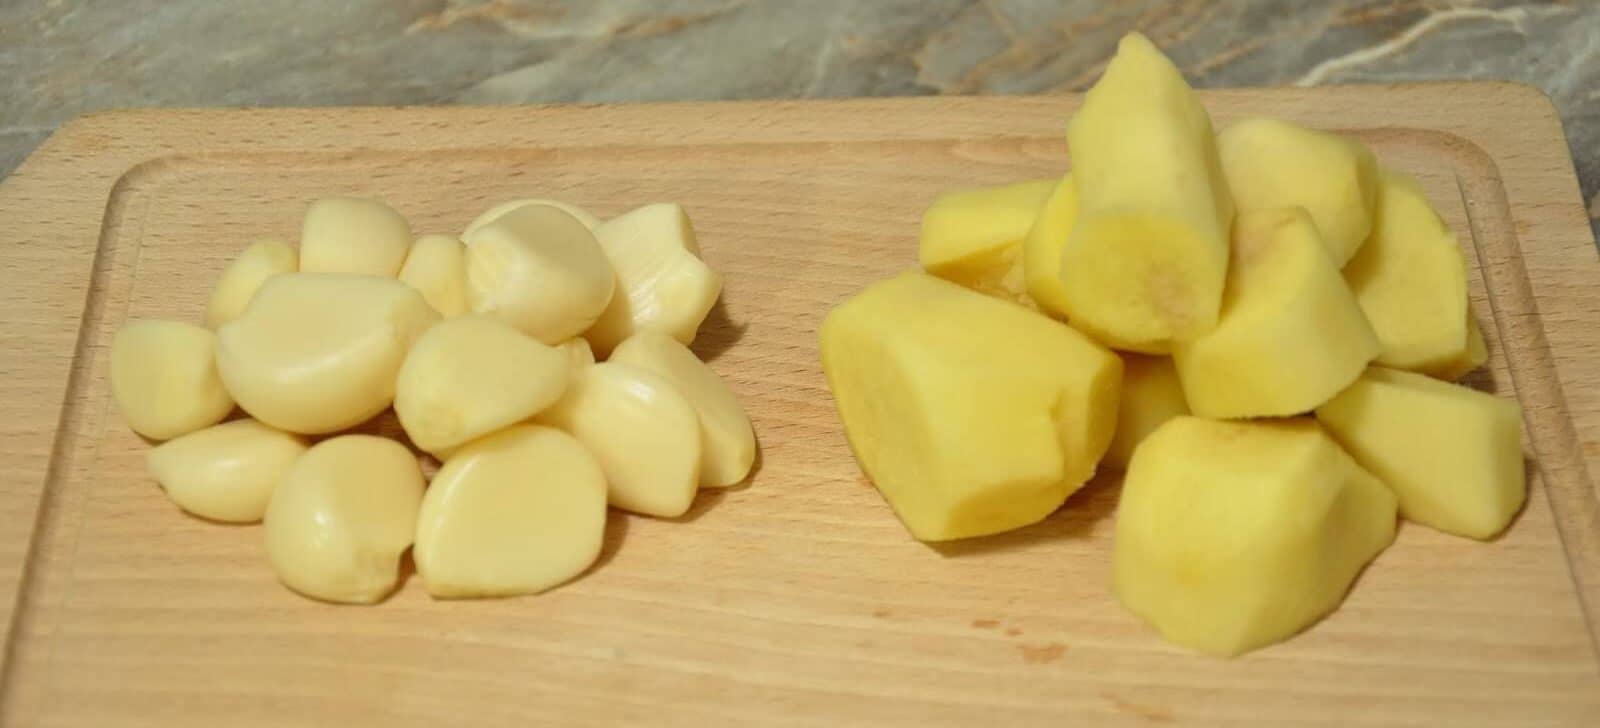 peeled ginger and garlic on wooden board